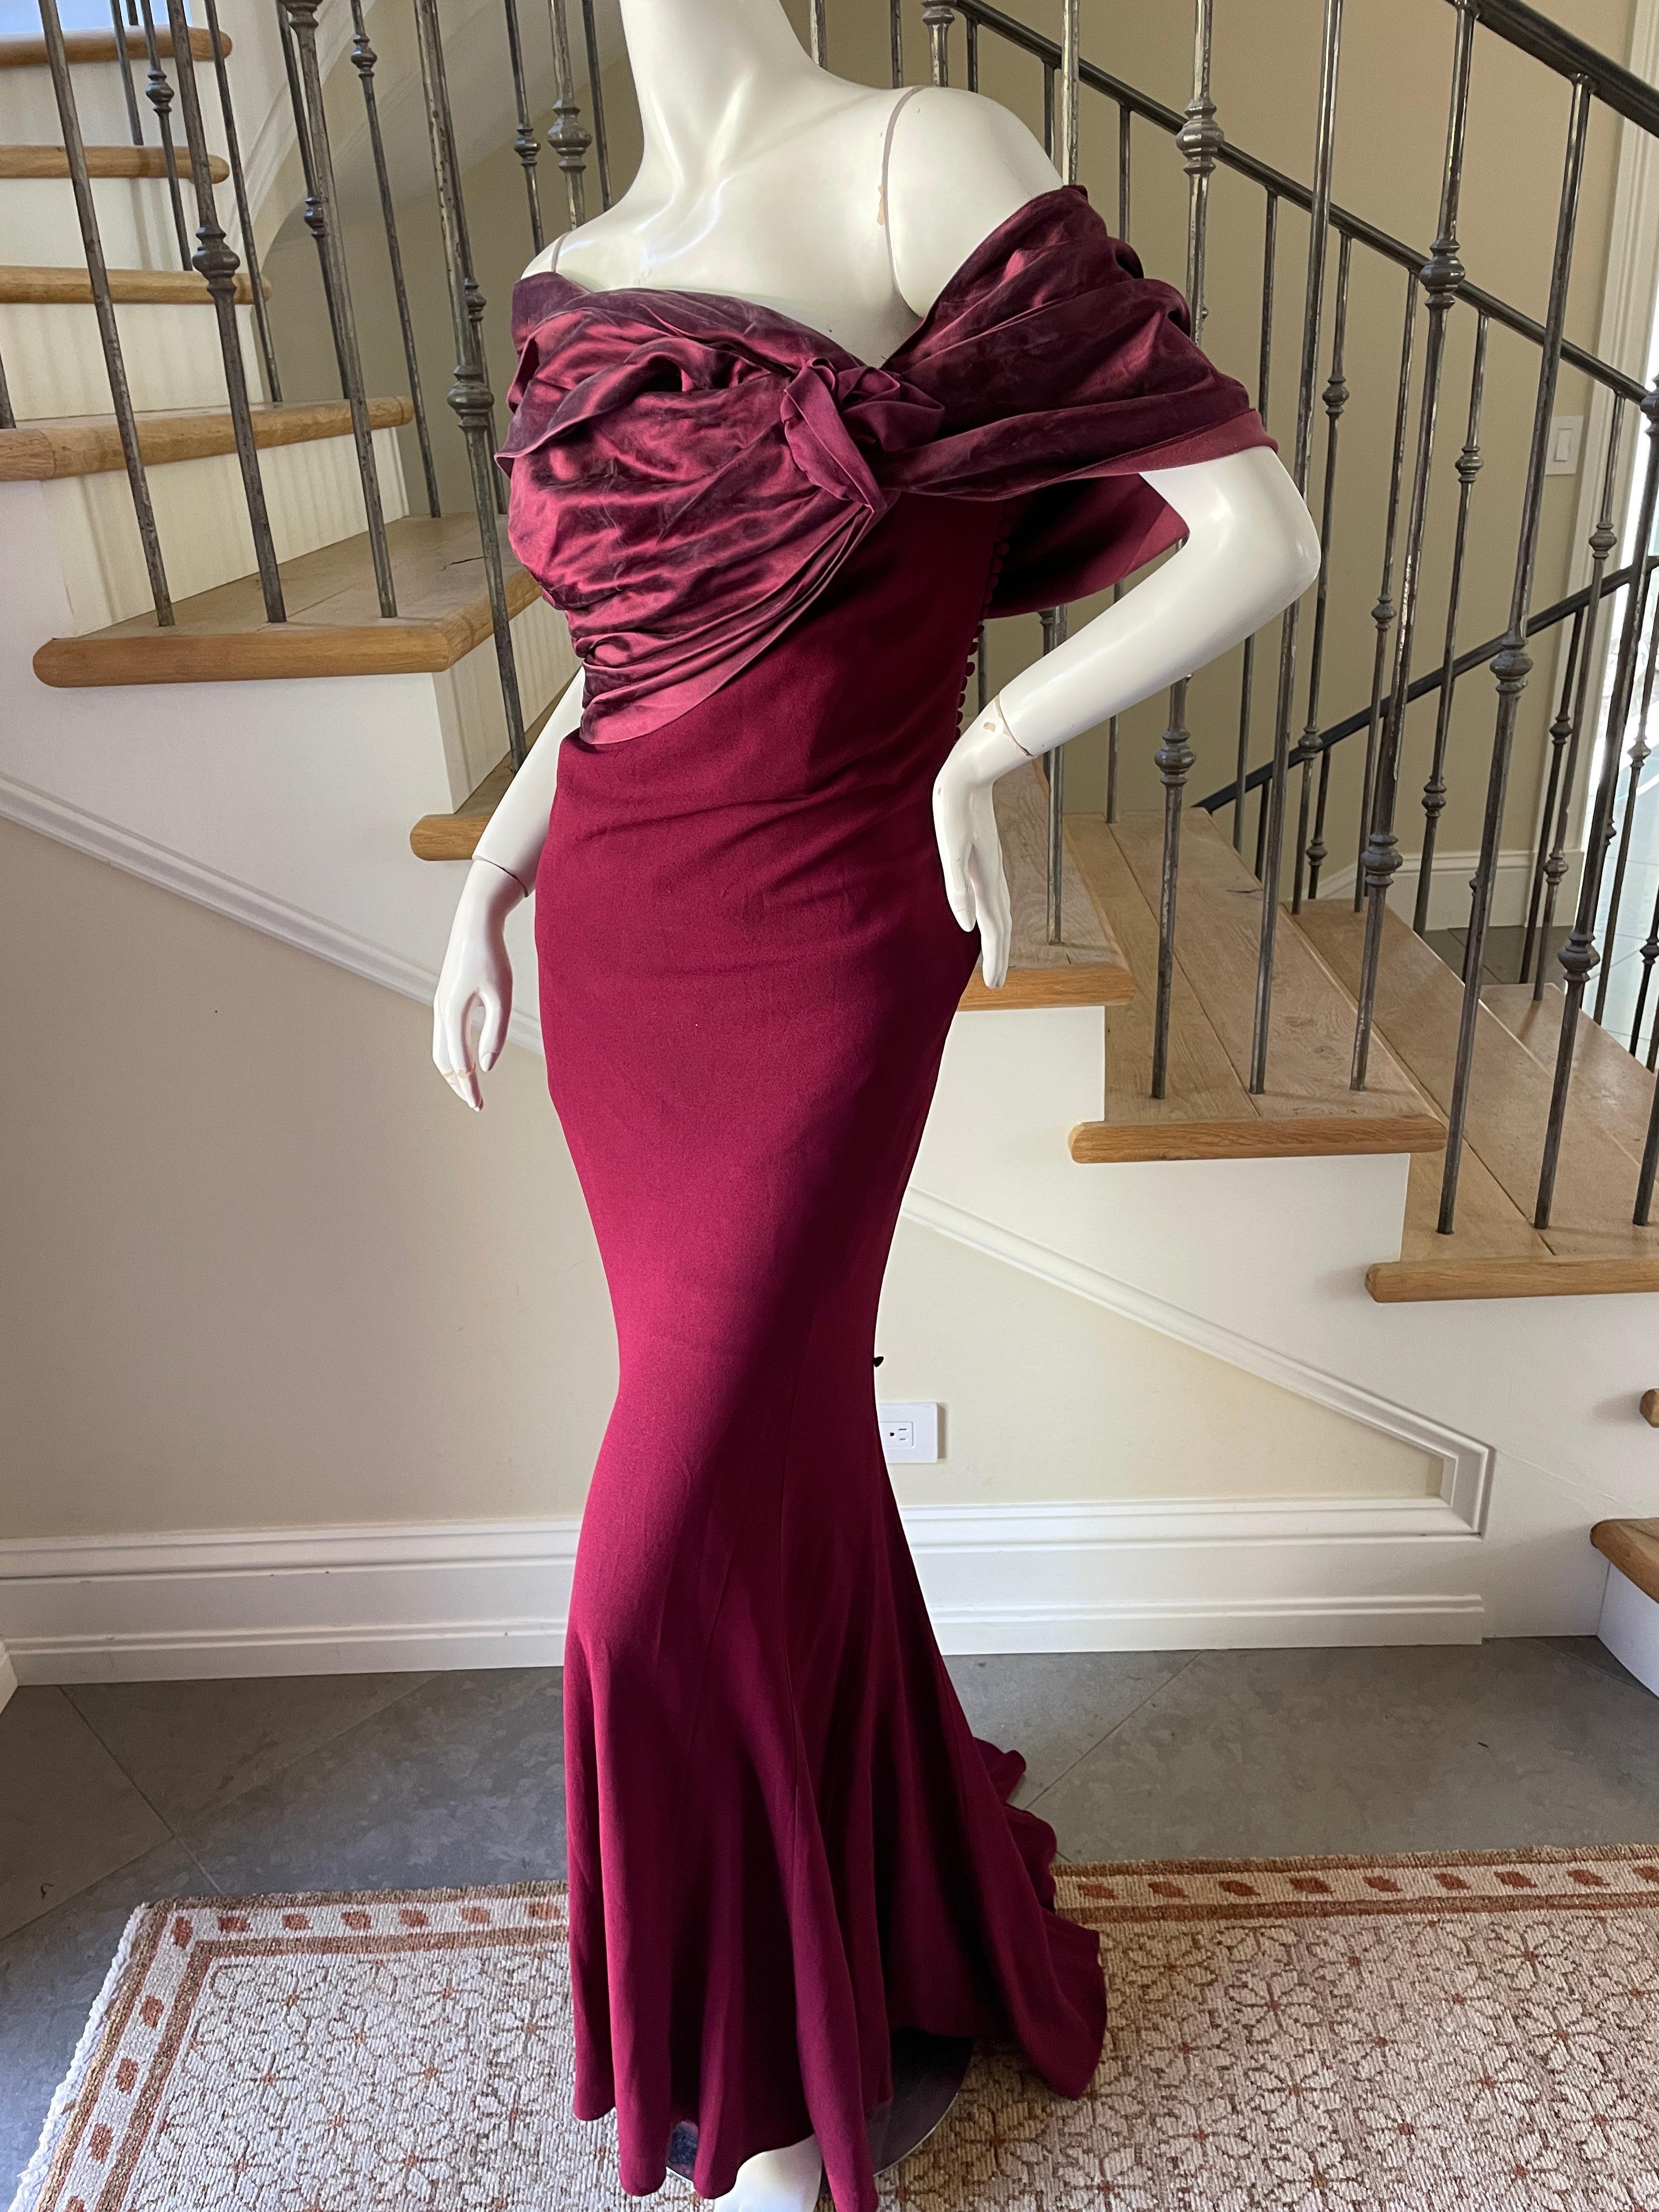 Christian Dior by John Galliano Burgundy Red Draped Evening Dress For Sale 4